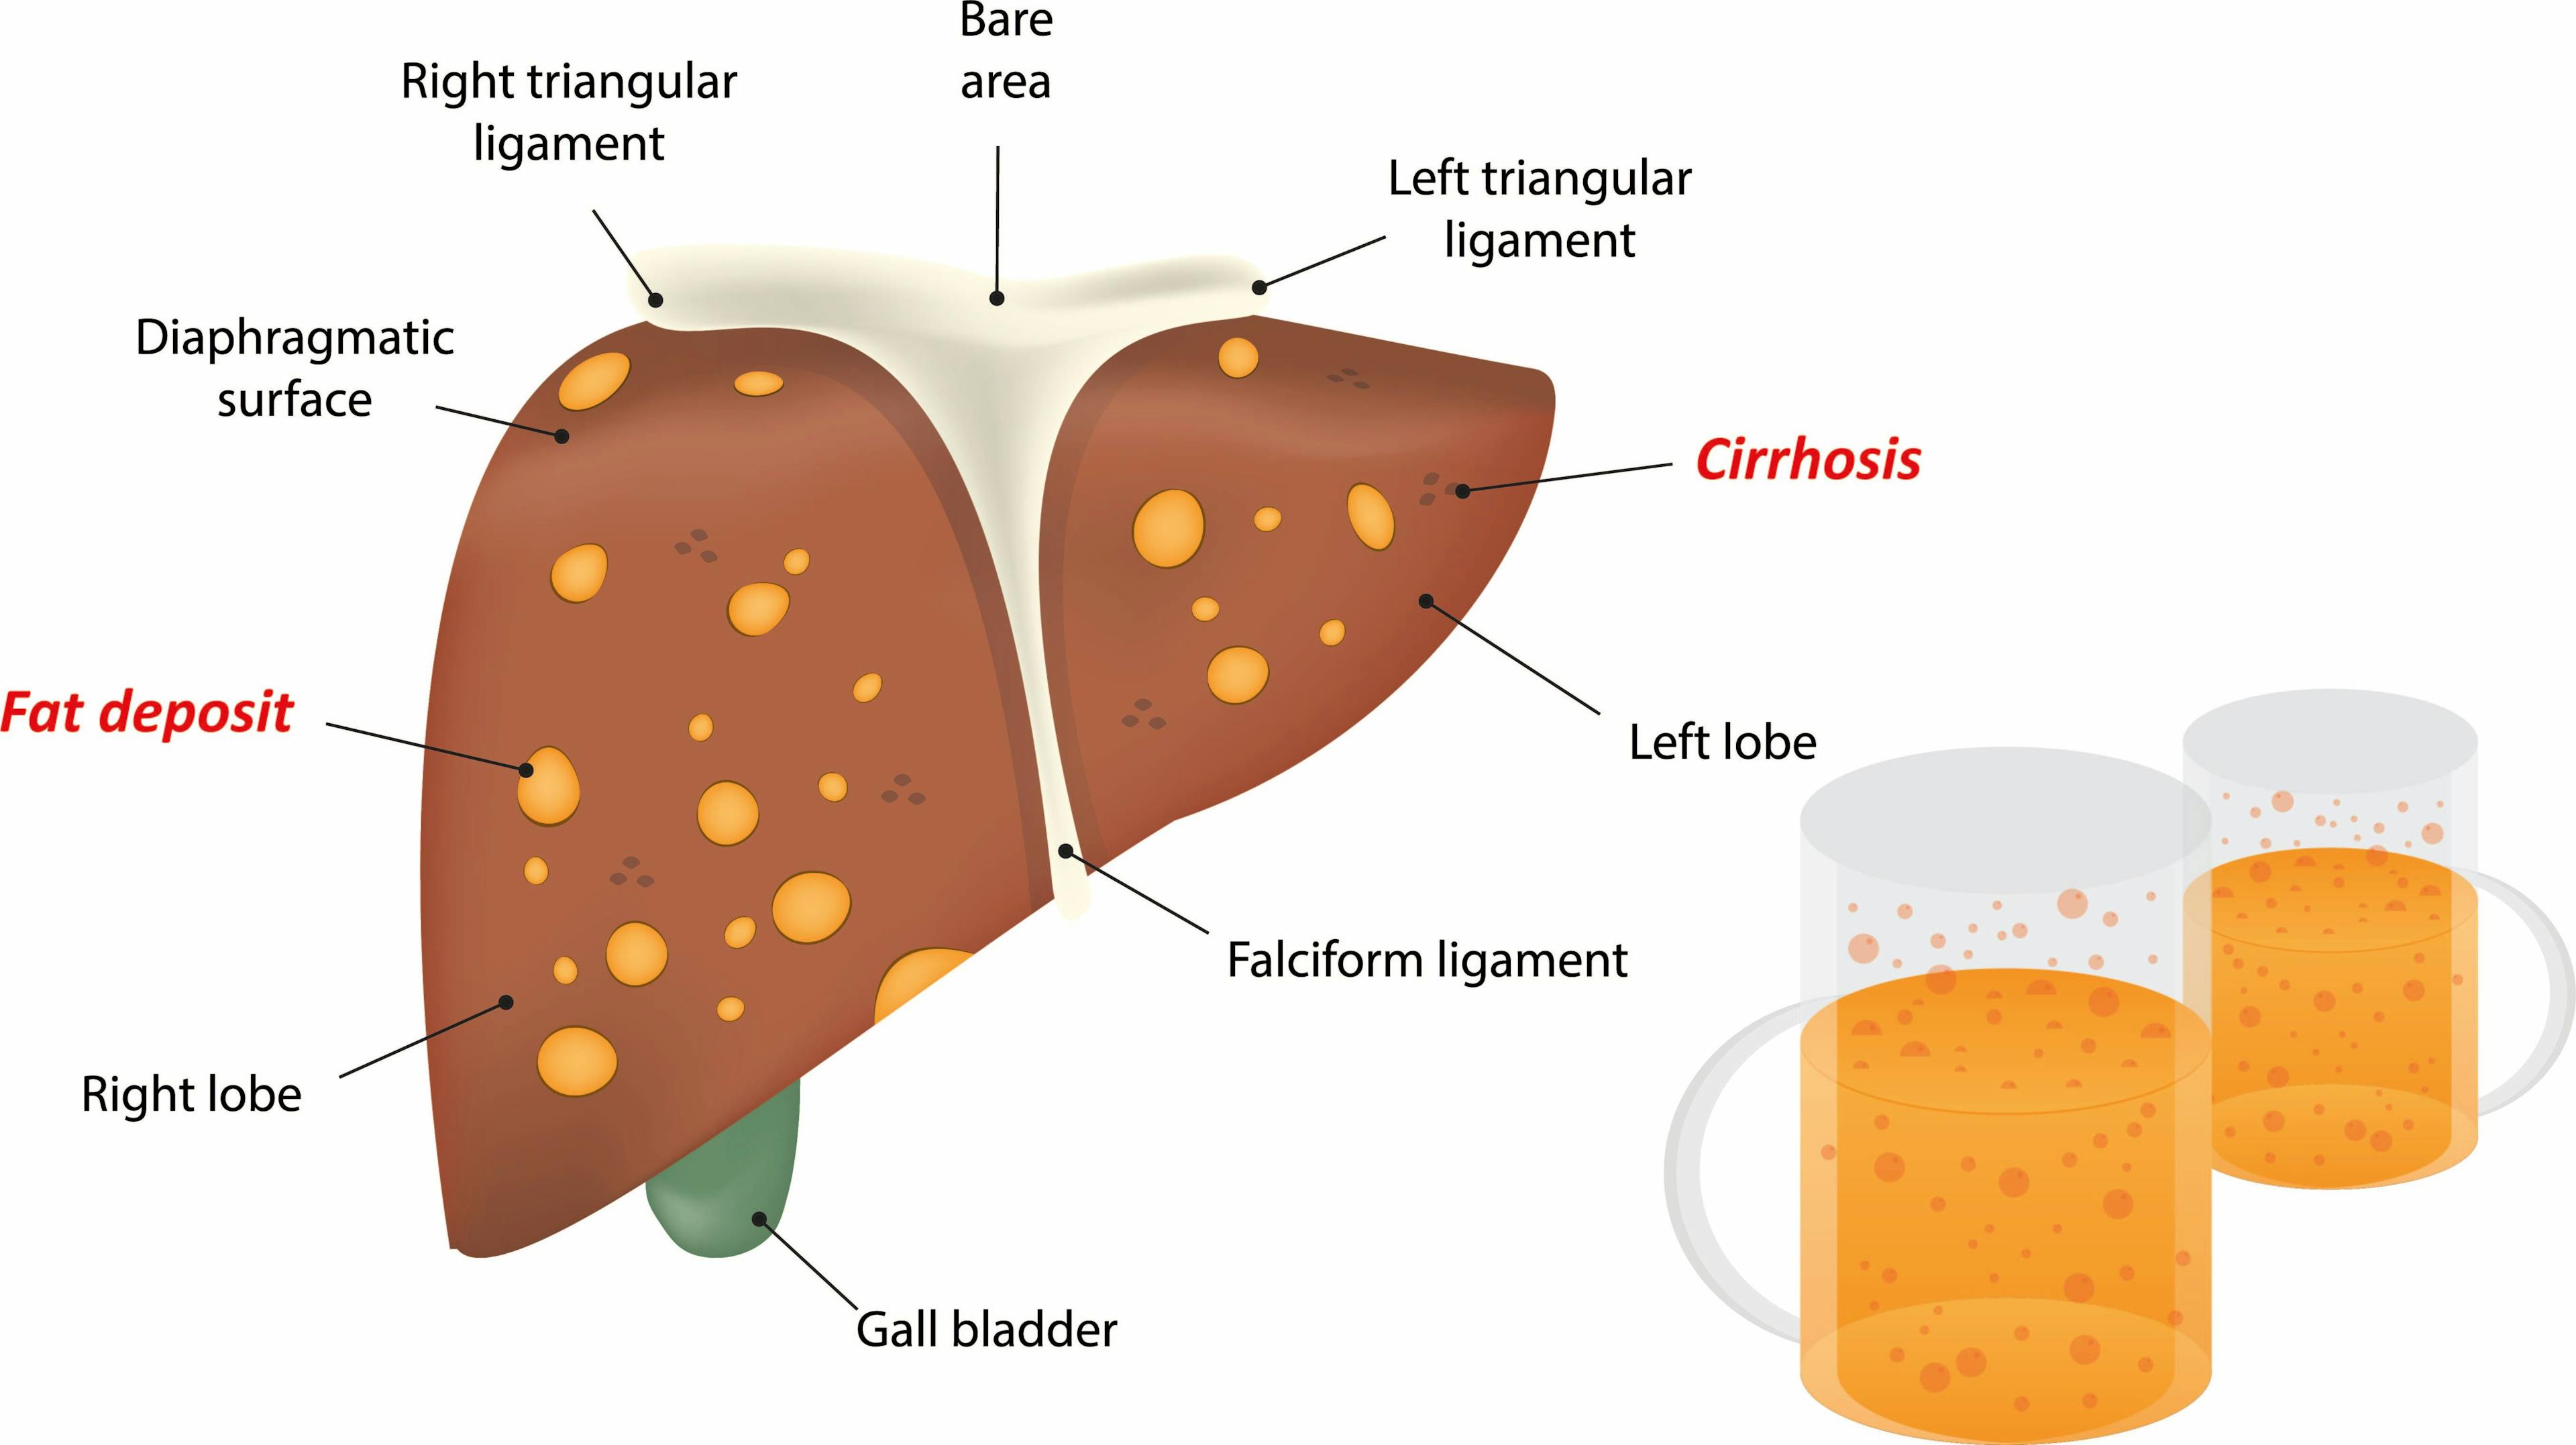 Identifying Causes and Effects of Alcohol-Related Liver Disease